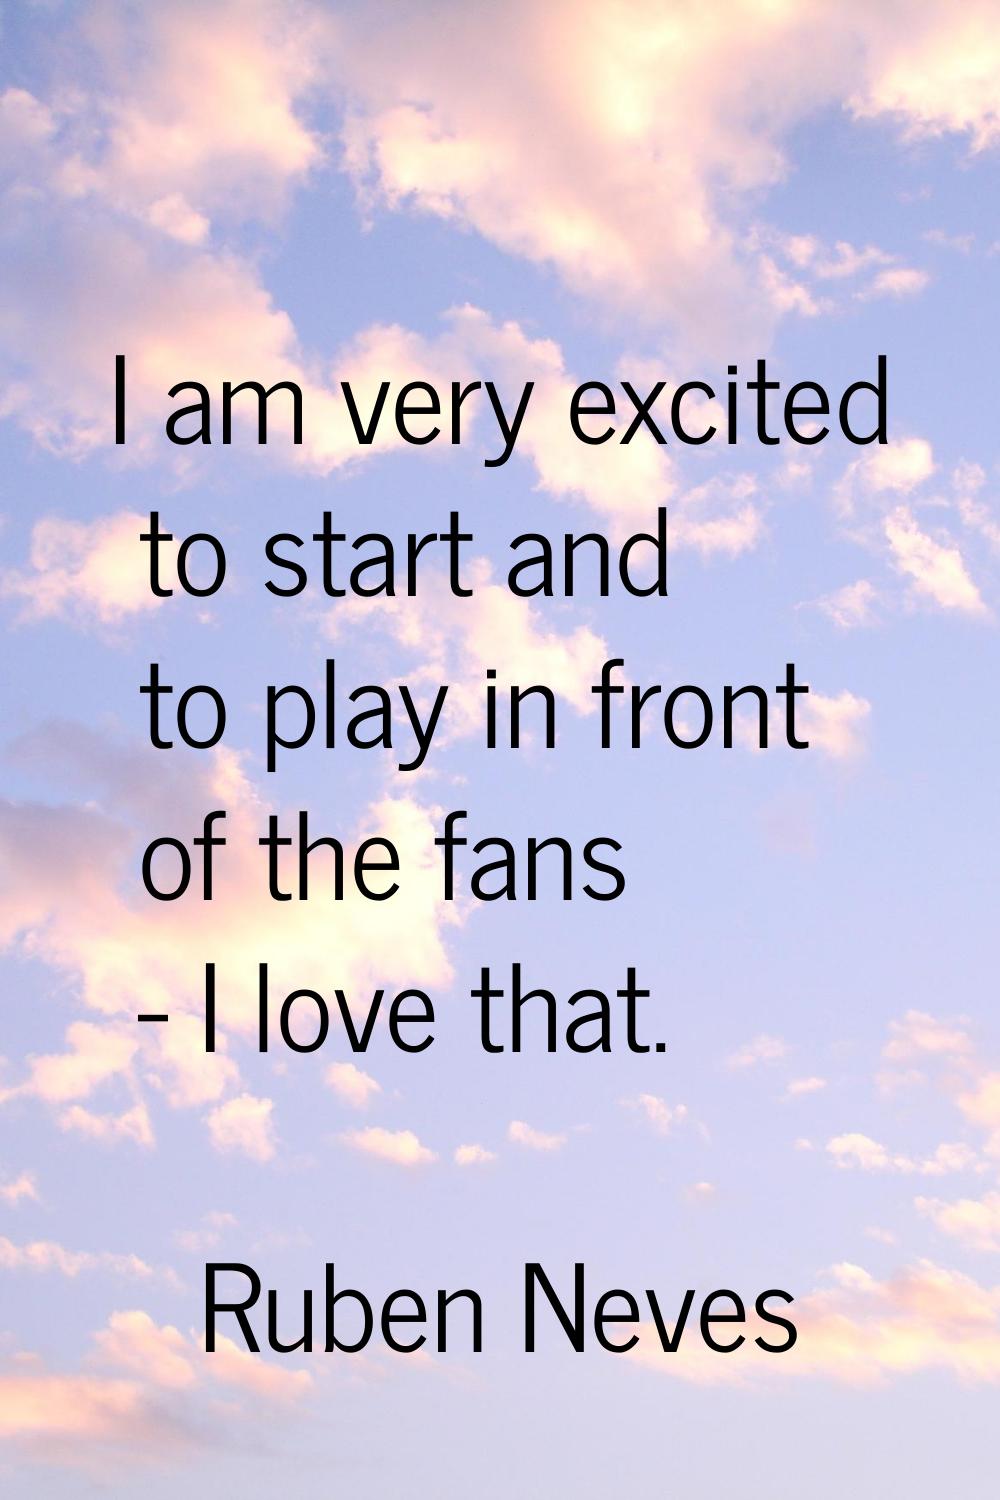 I am very excited to start and to play in front of the fans - I love that.